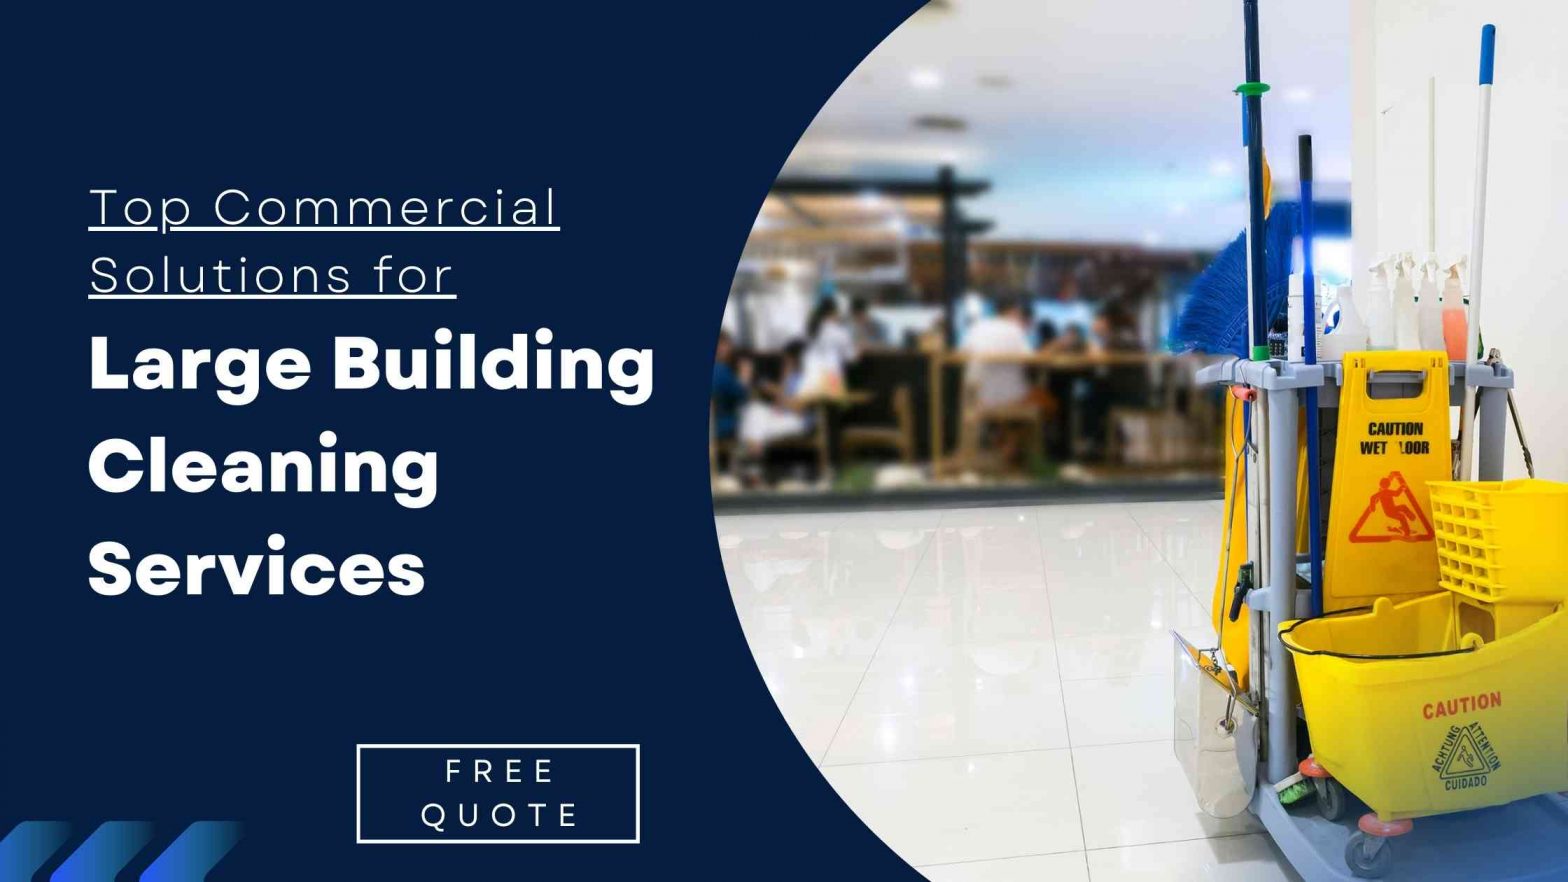 Top Commercial Solutions for Large Building Cleaning Services